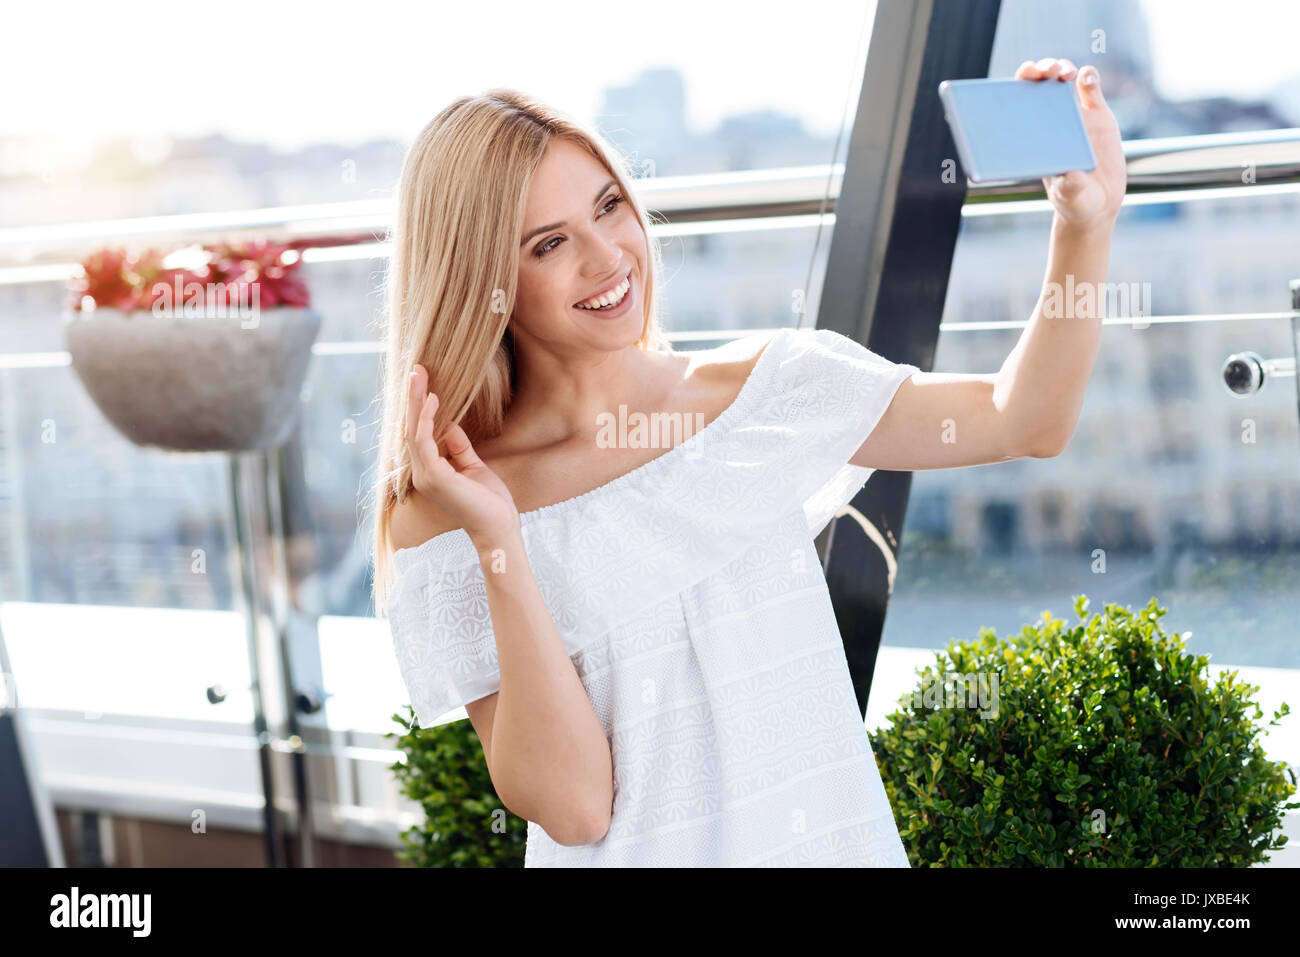 Happy delighted woman taking a selfie Stock Photo